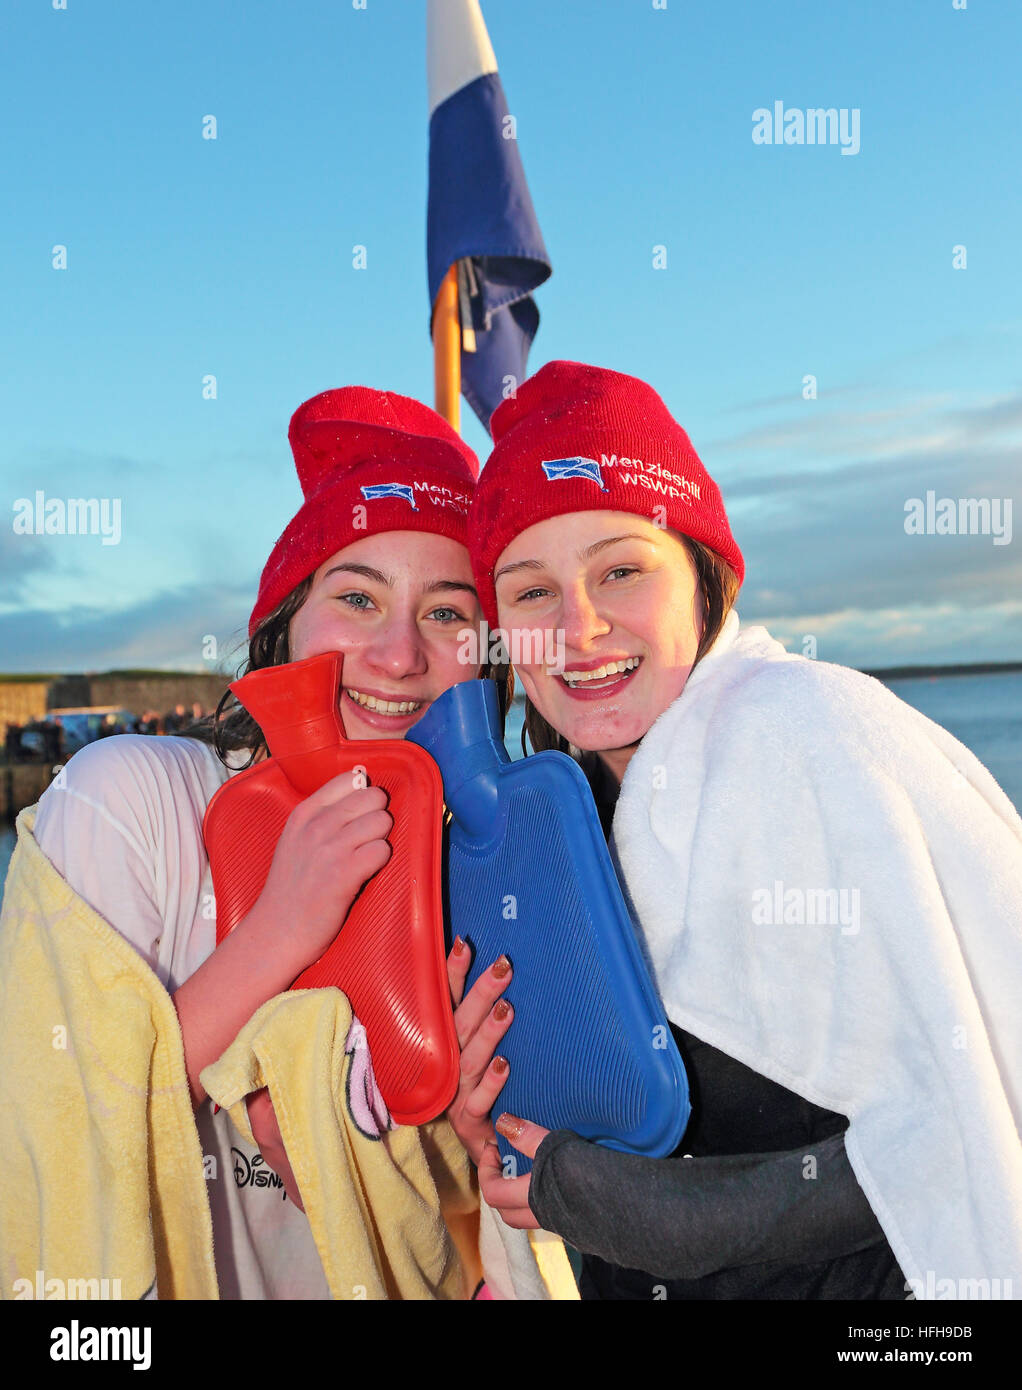 New Years Day 'Dook' Broughty Ferry, Dundee, UK. 1st Jan, 2017. swimmers in fancy dress prepare to jump into freezing waters of The River Tay © Derek Allan/Alamy Live News Stock Photo